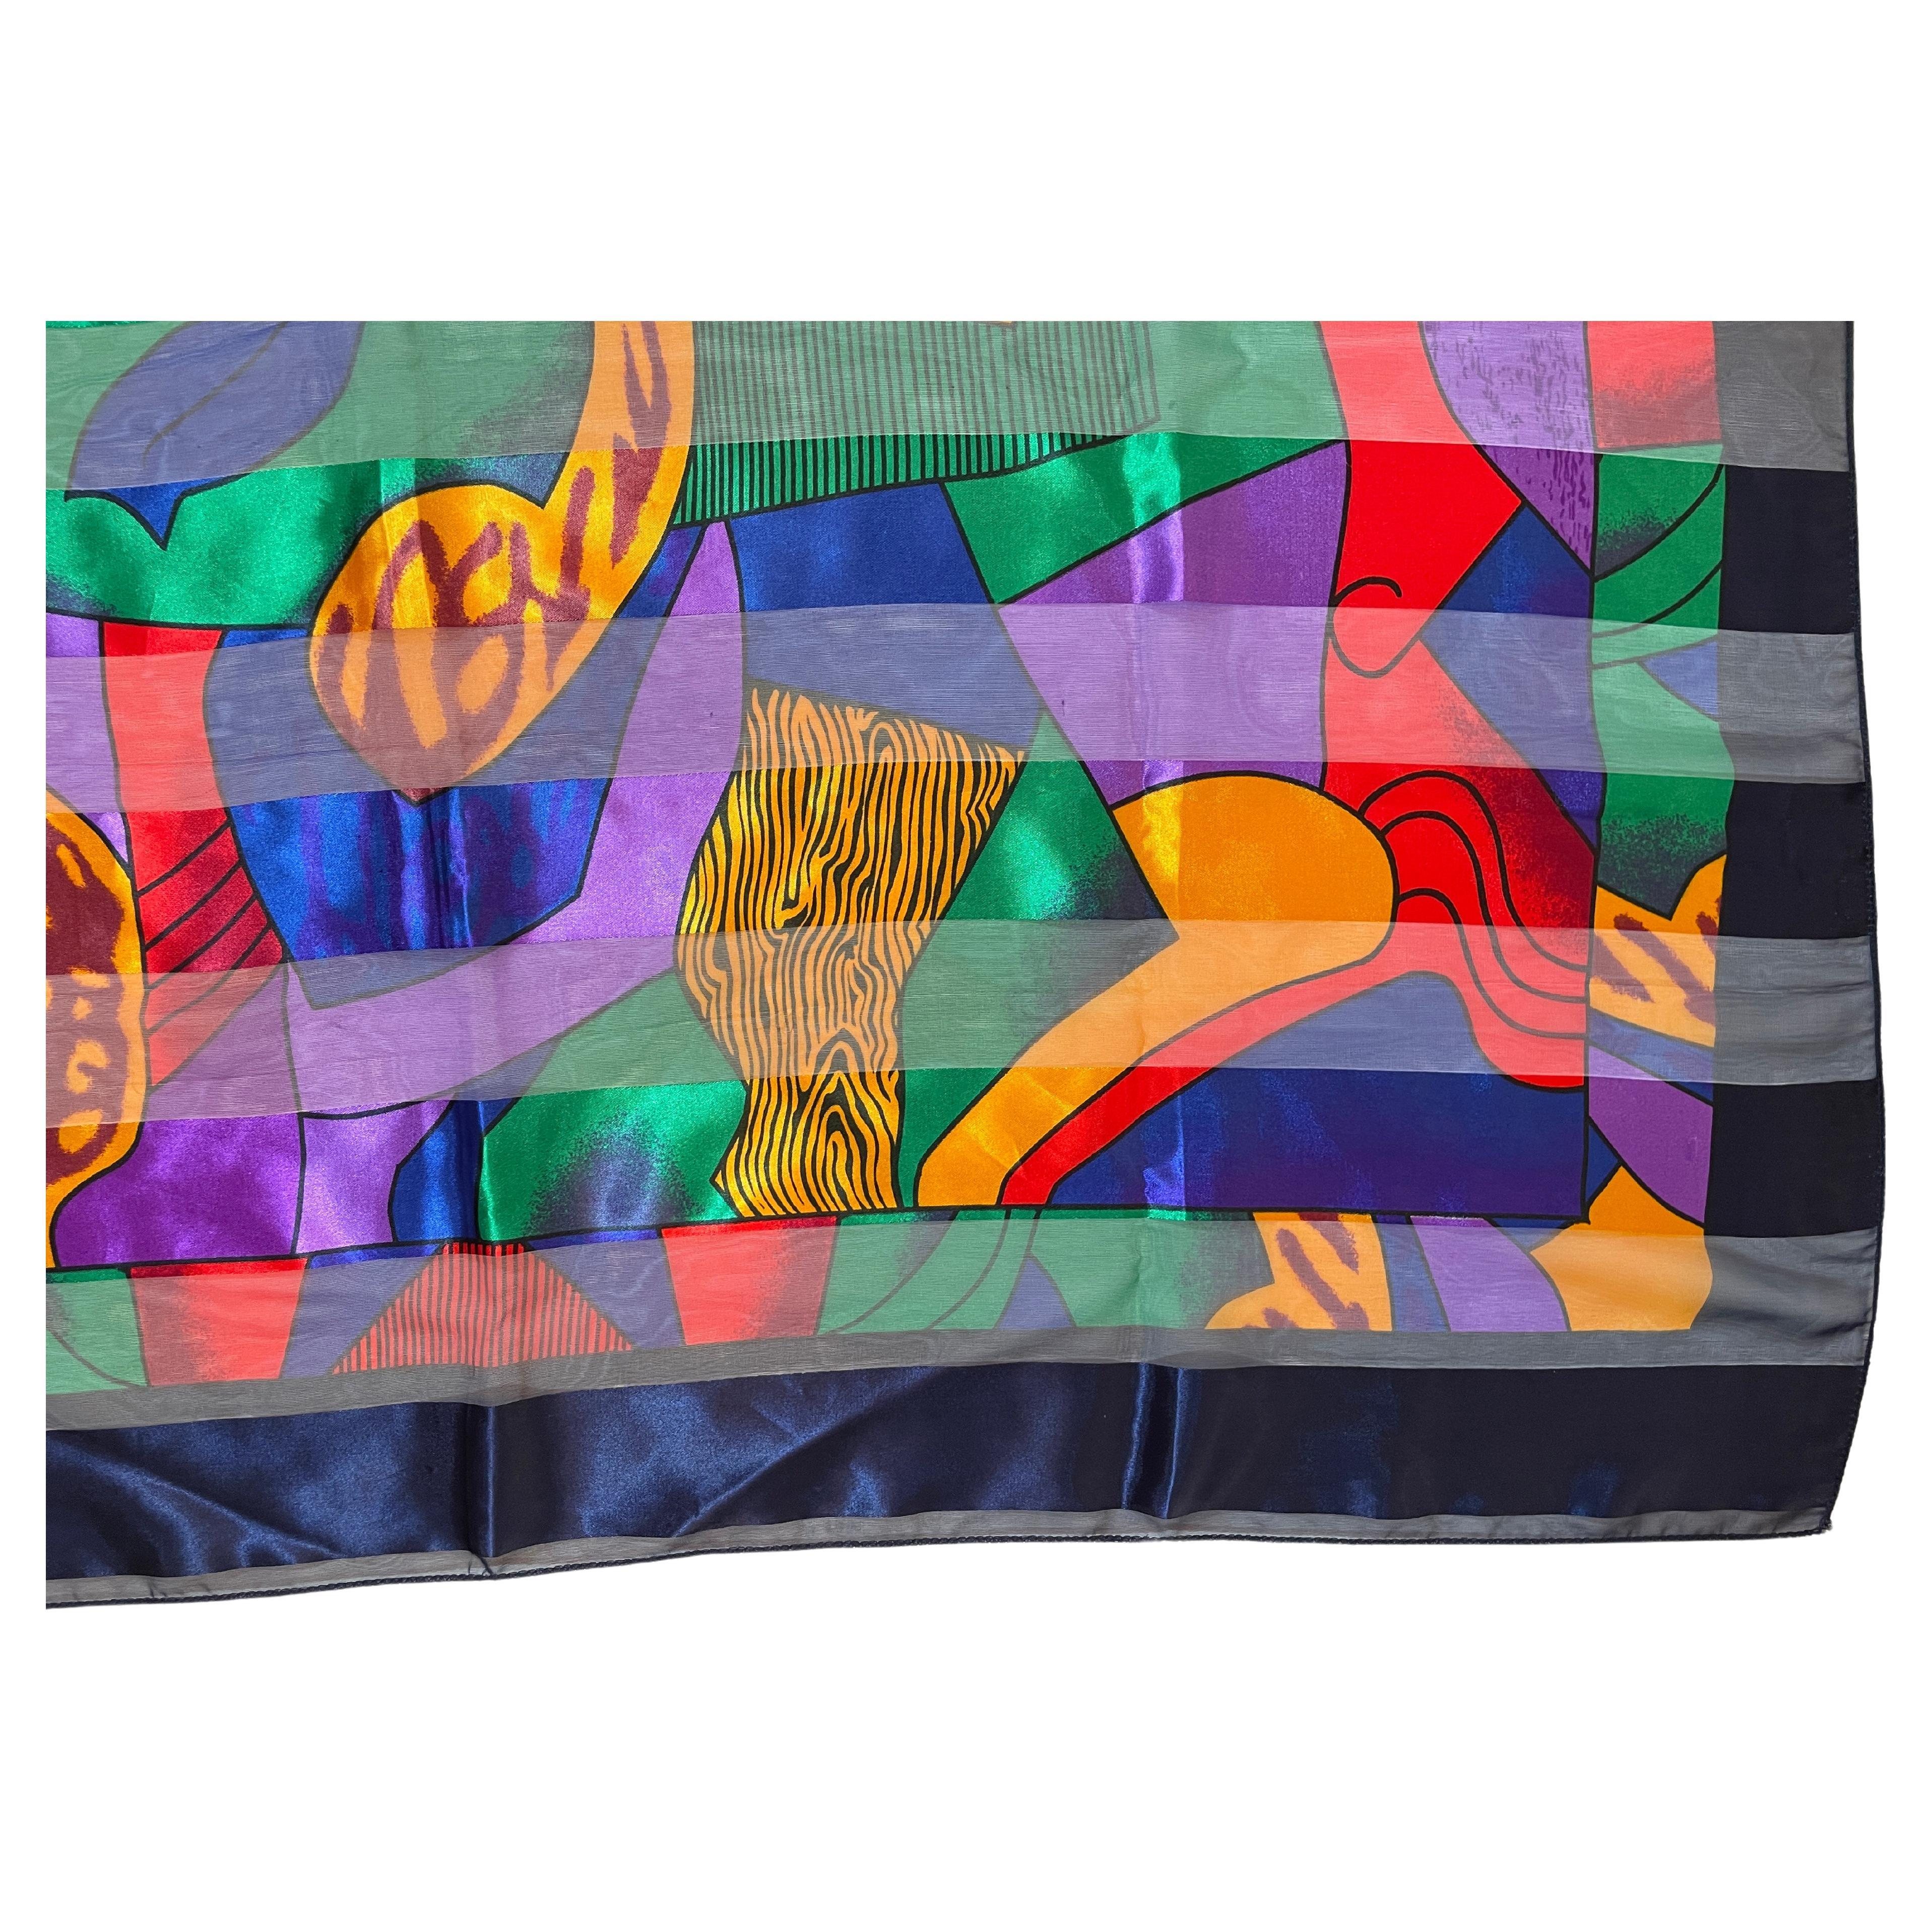 Vintage after Pablo Picasso Abstract Figural Scarf 1980s.
Dimensions: 40” x 40”.
This vintage Picasso silk scarf features one of his paintings which is a multi-color abstract cubist figural design.
Large Colorful Vintage Satin Scarf, Abstract Cubist